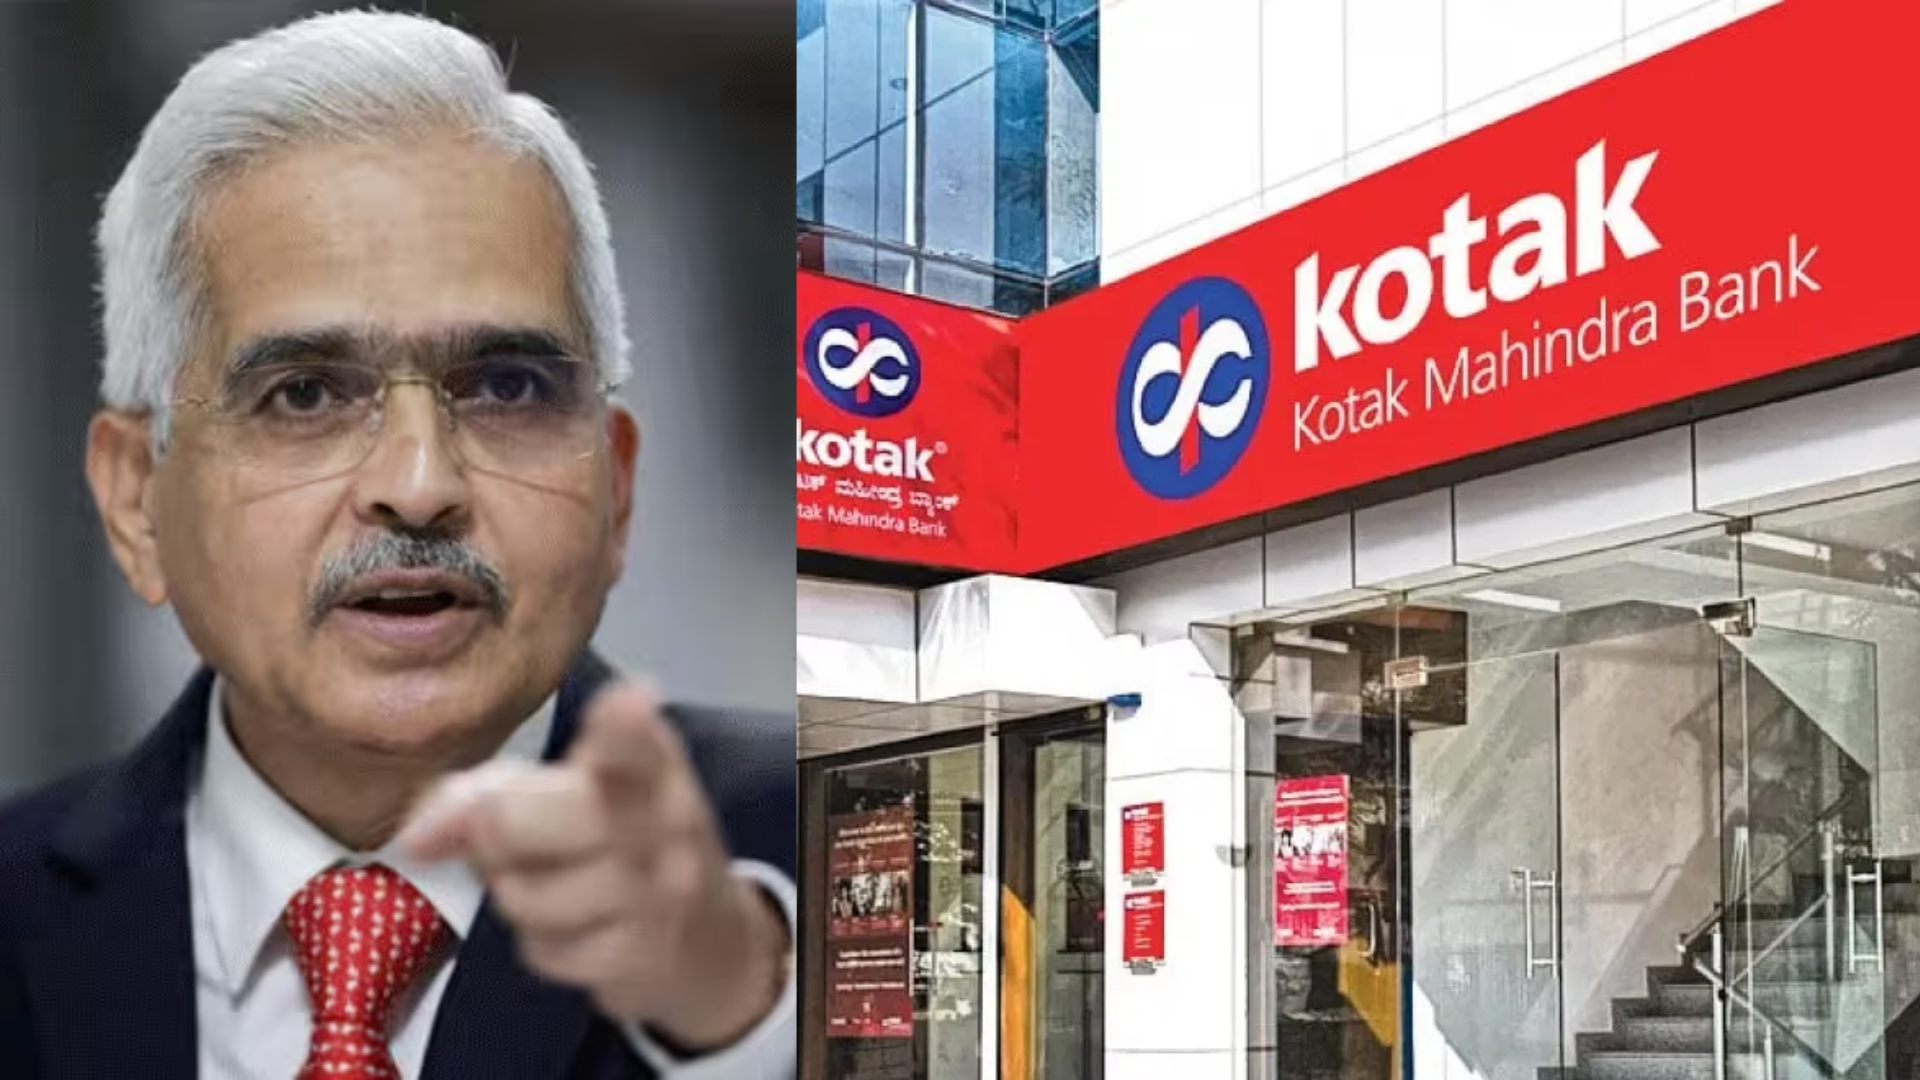 RBI Restrictions On Kotak Mahindra Bank: What Does It Mean For Current Customers?